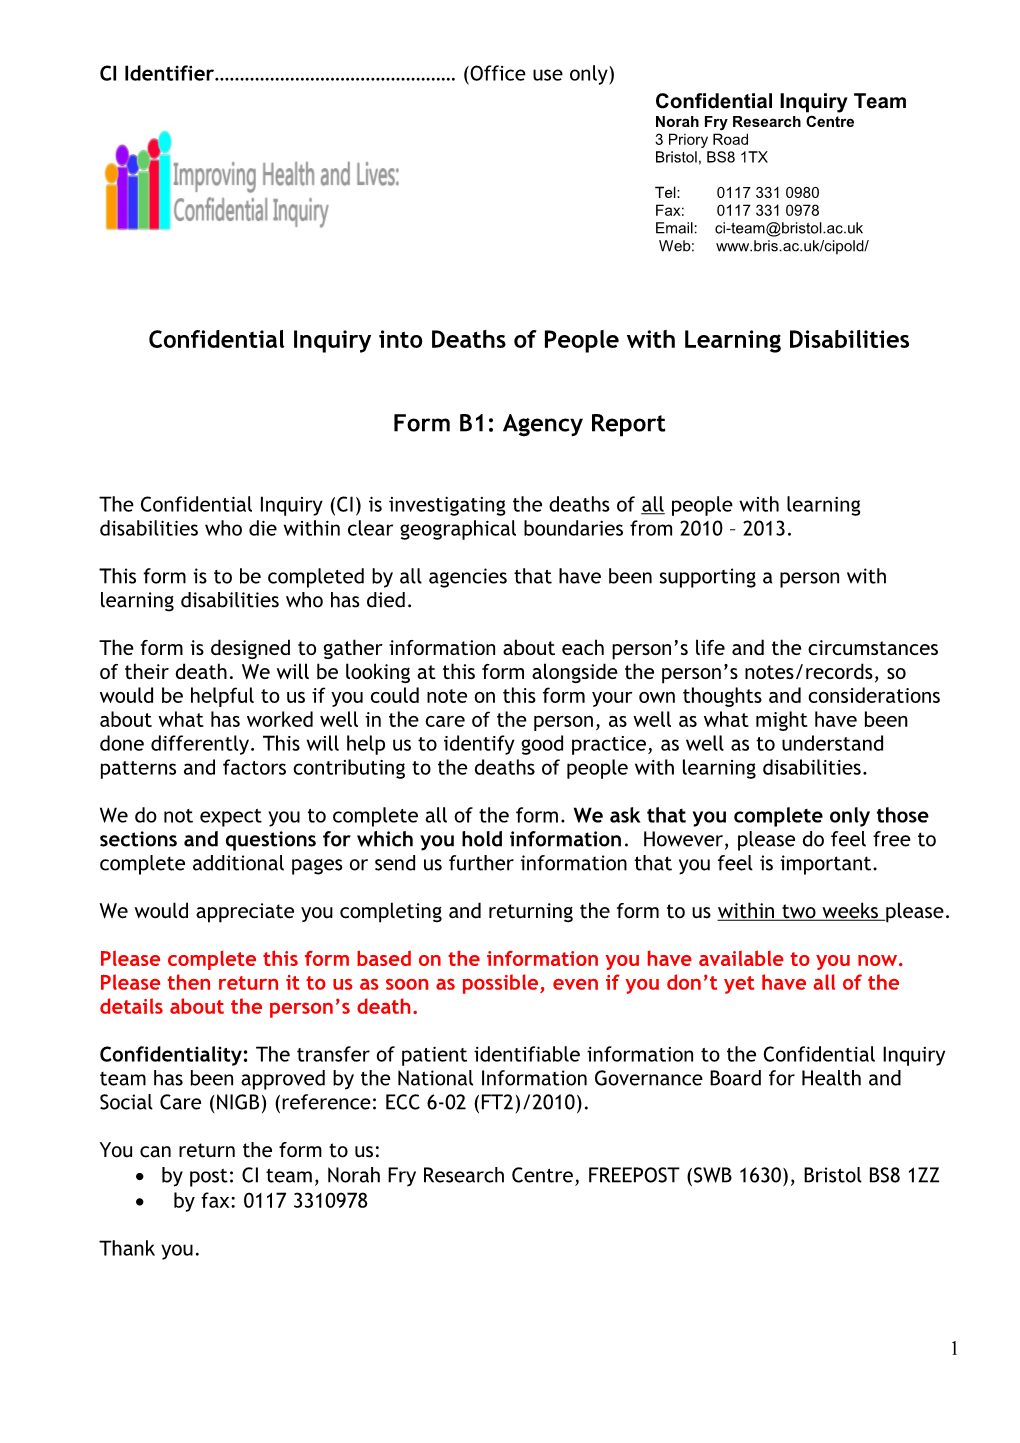 Confidential Inquiry Into Deaths of People with Learning Disabilities